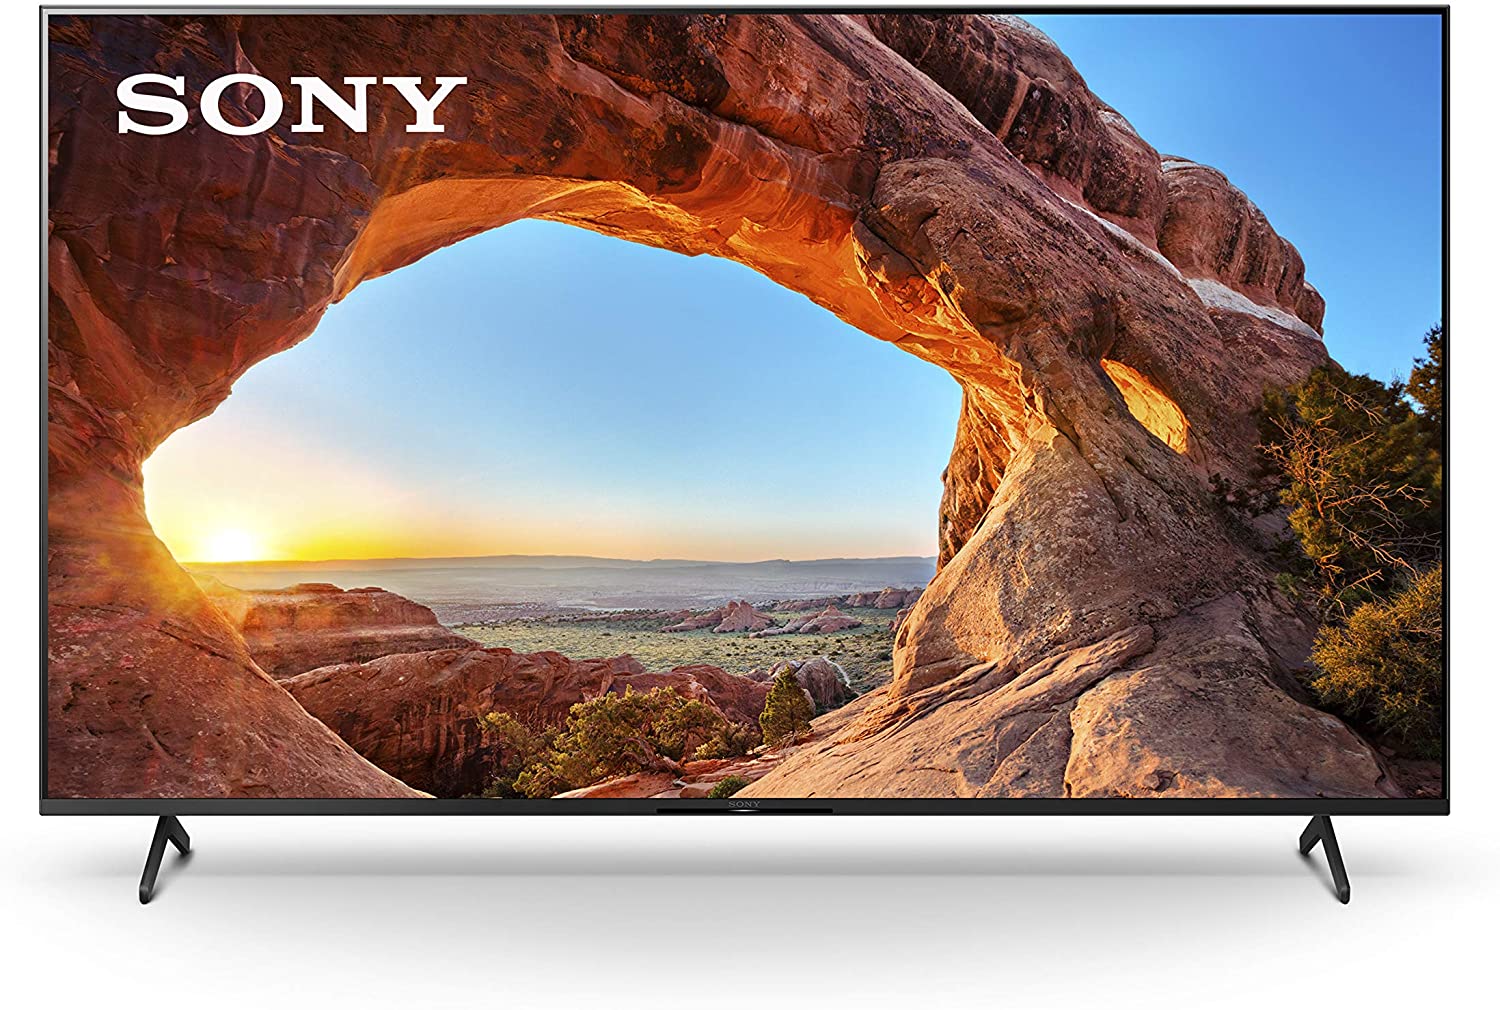 Sony 65 Inch TV: 4K Ultra HD LED Smart Google TV with Native 120HZ Refresh Rate $798